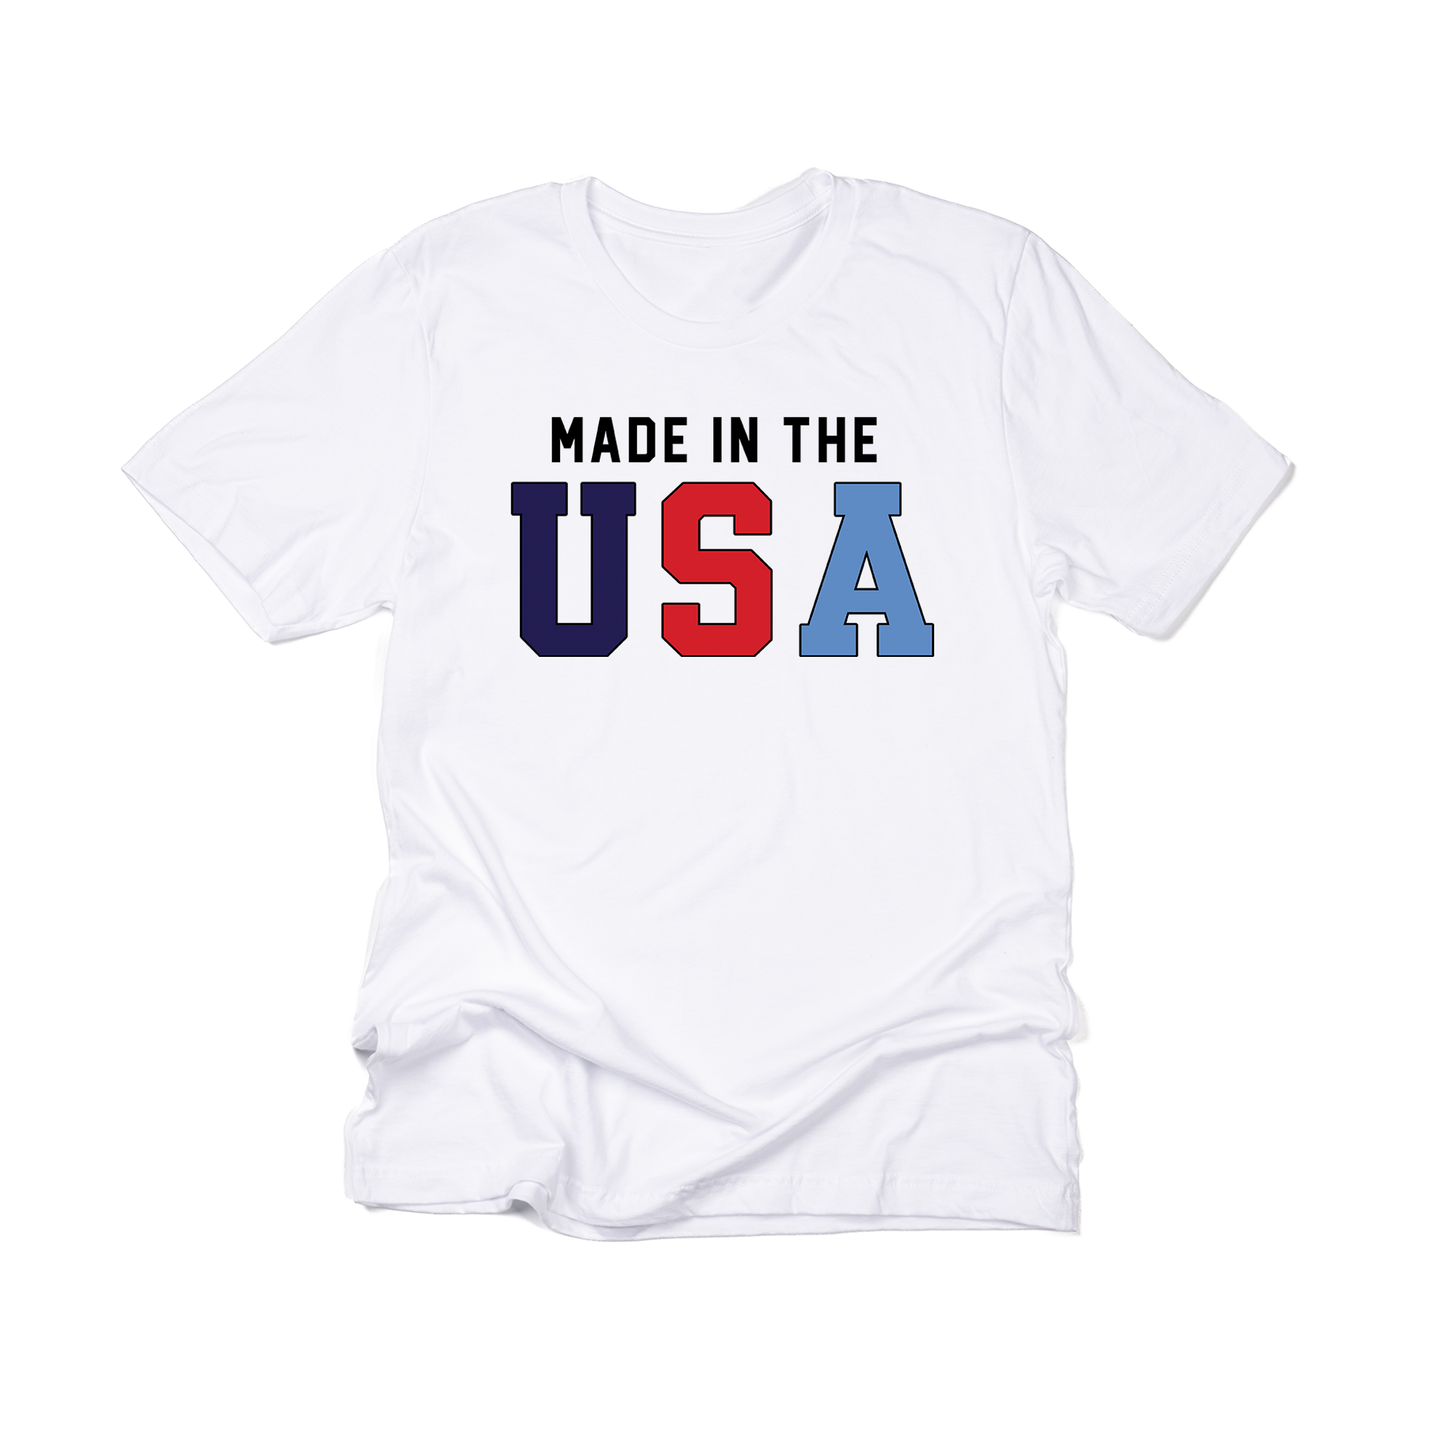 Made in the USA - Tee (White)